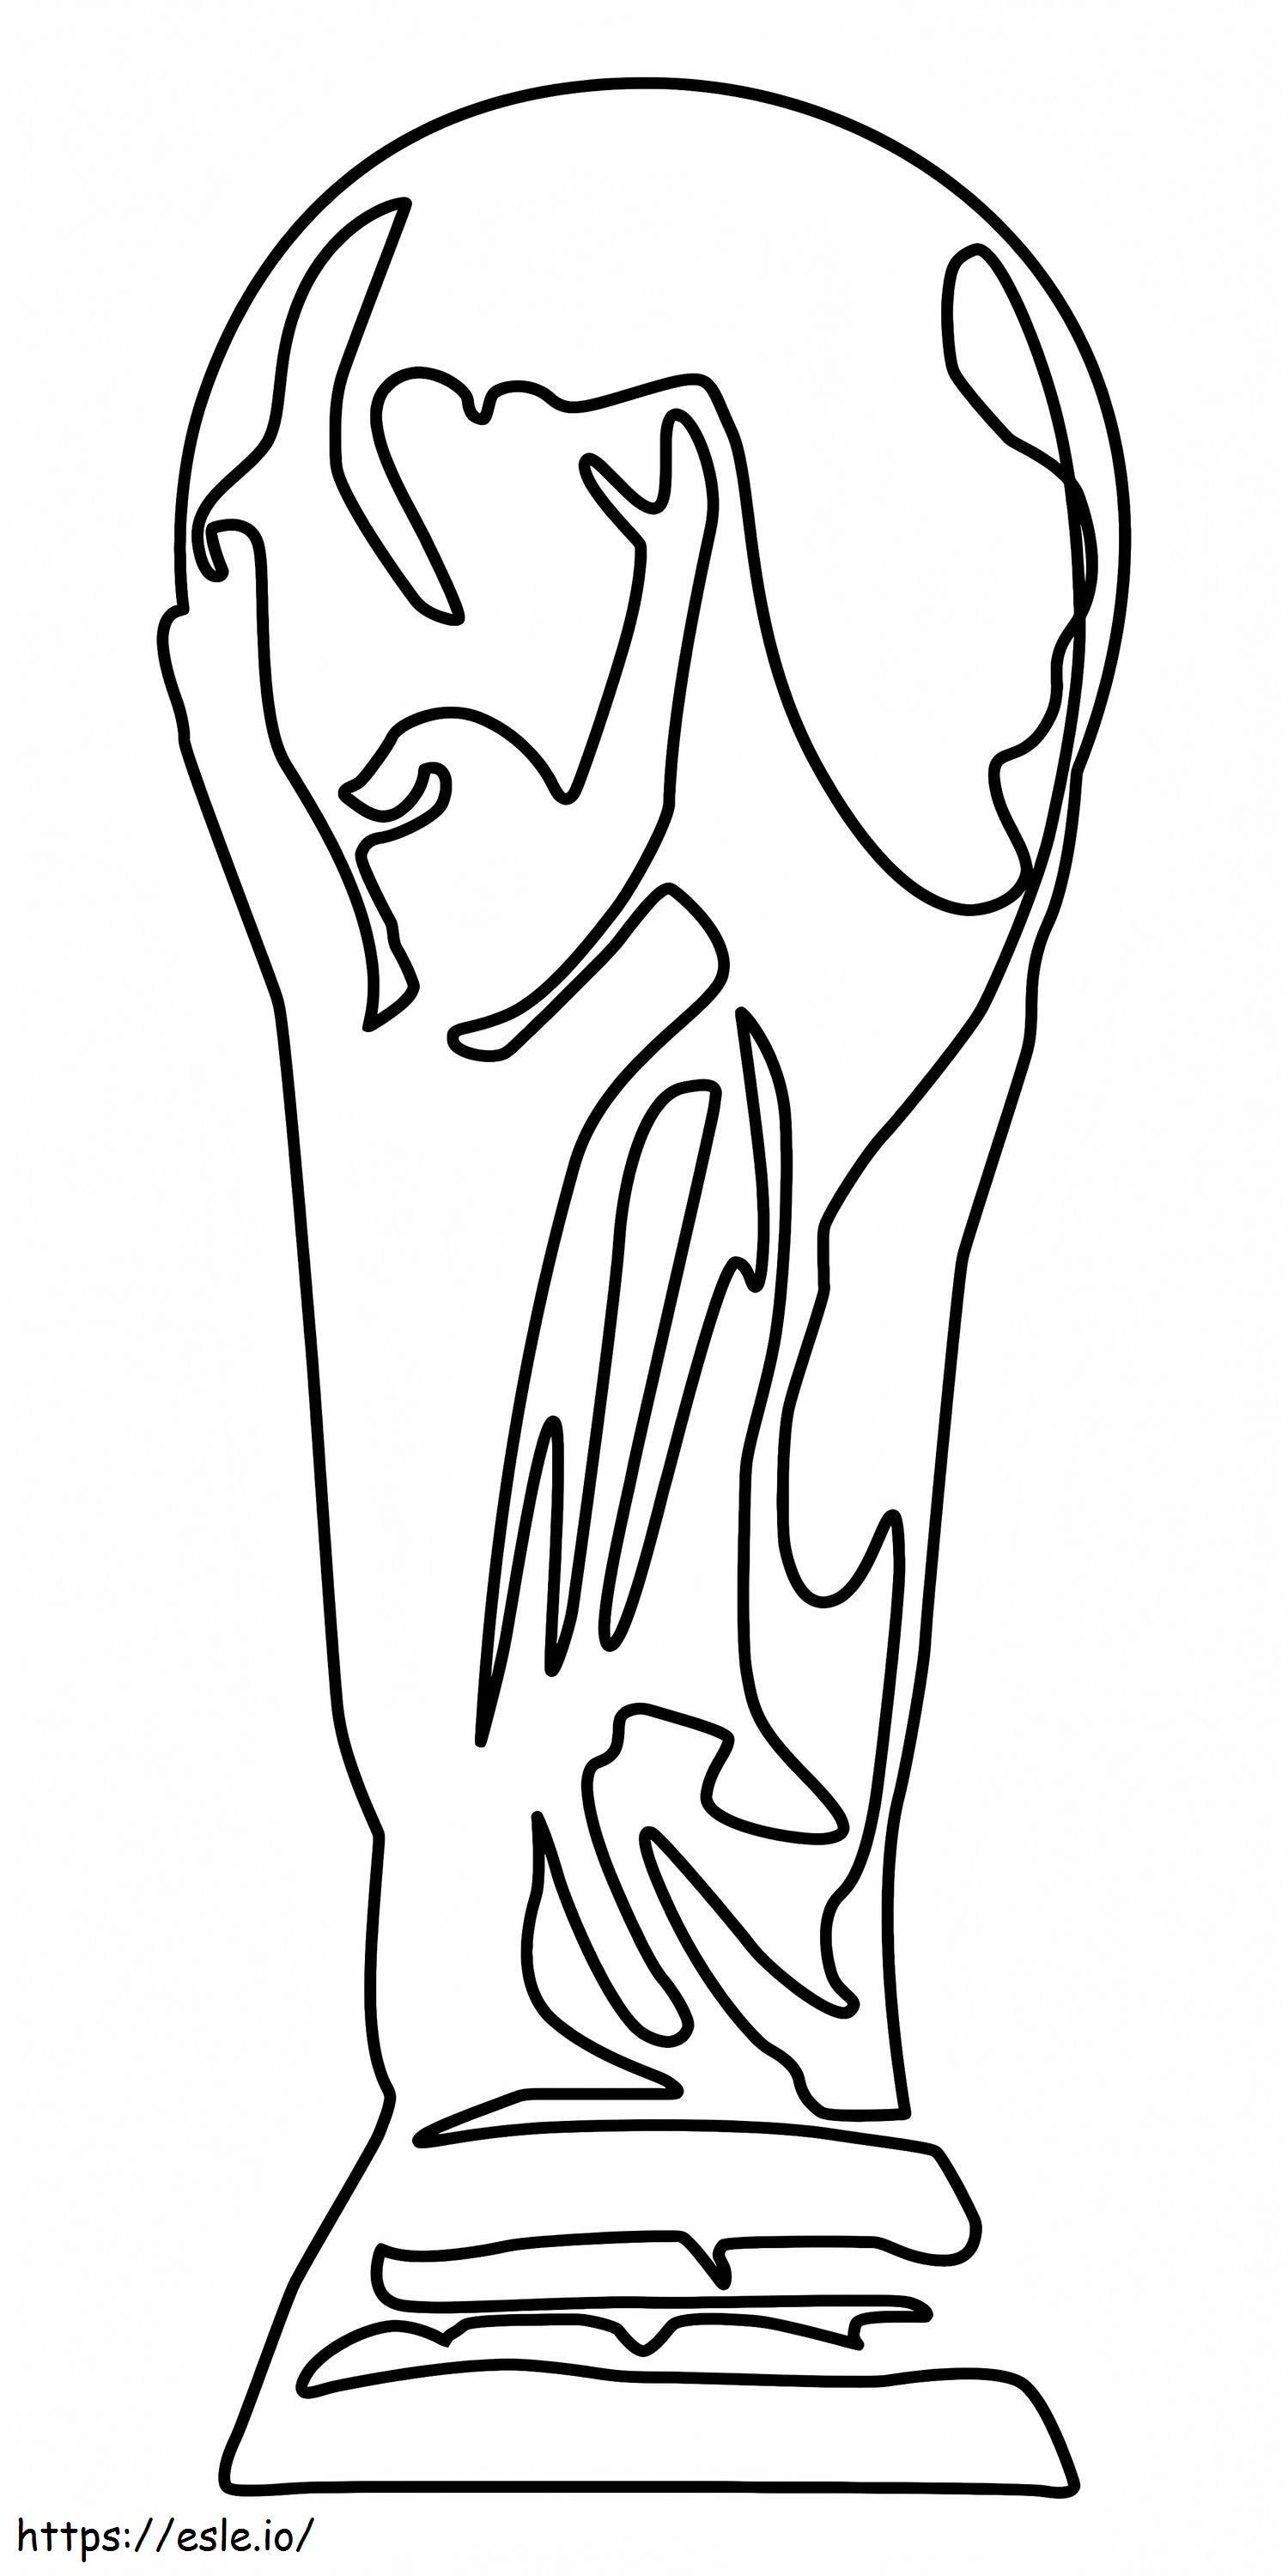 Trophy coloring page